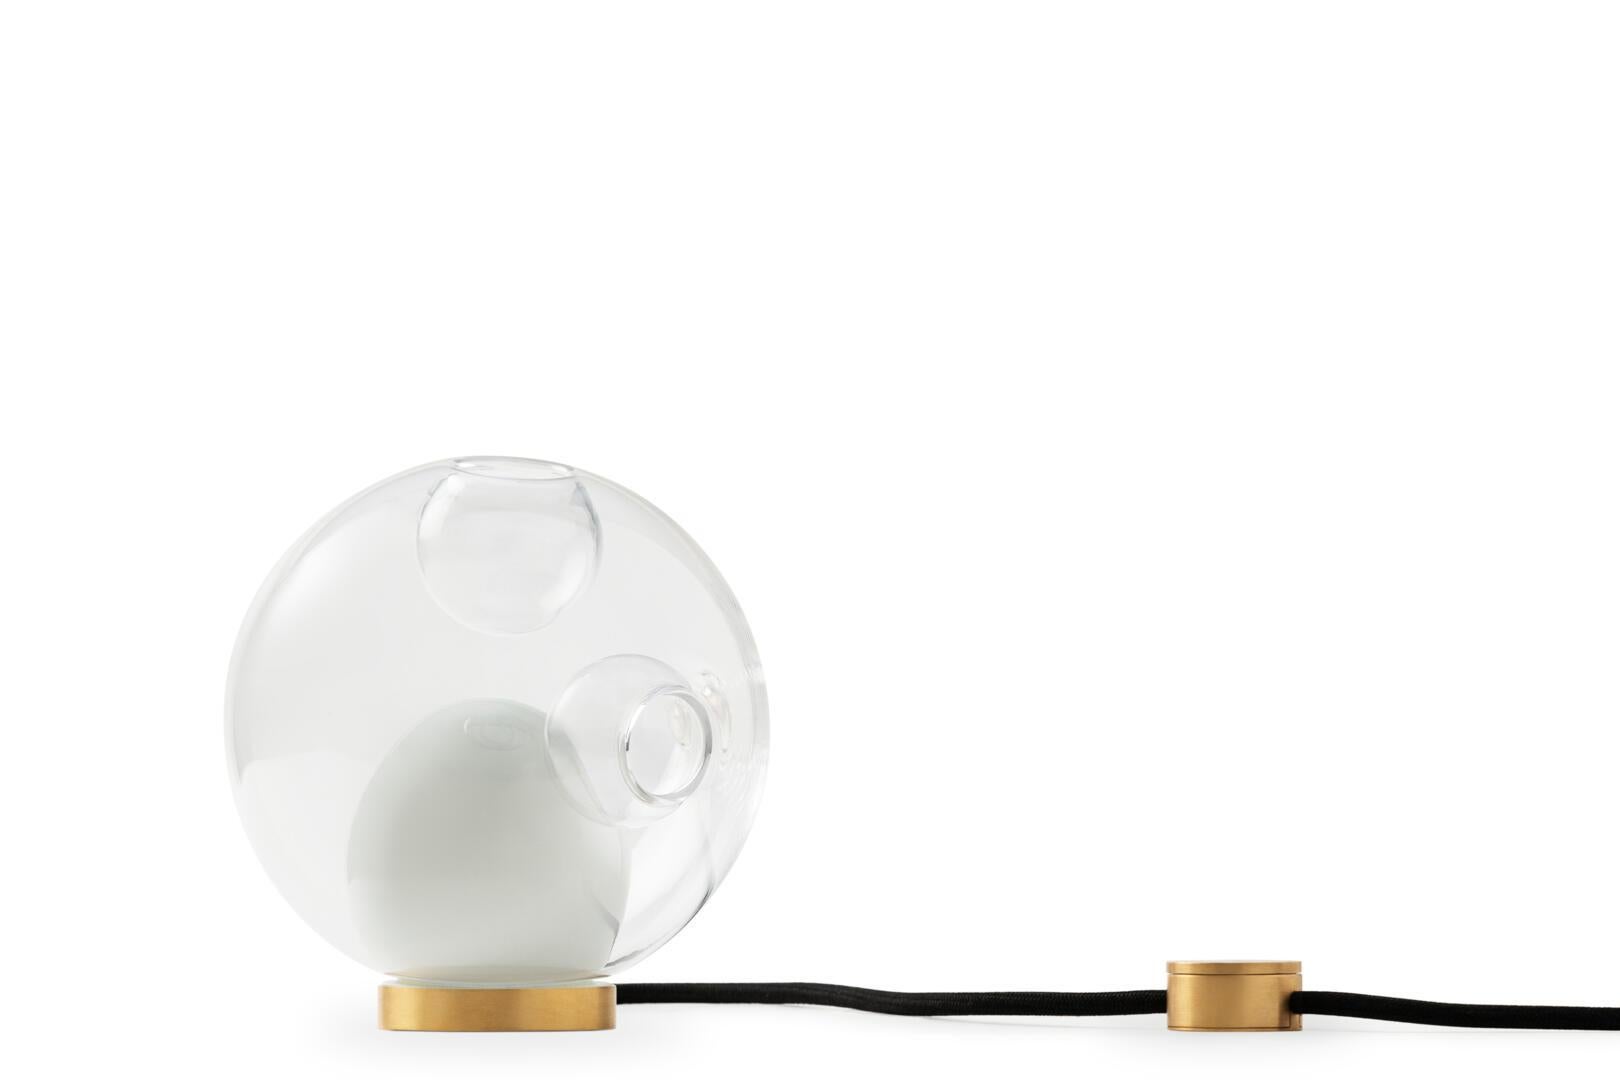 Table lights
A variety of Bocci pendants can be used with the table light hardware, which includes an integral dimming system housed within a sleek brass cylinder. The black fabric cord is semi-rigid and may be sculpted to add form. The brass stand